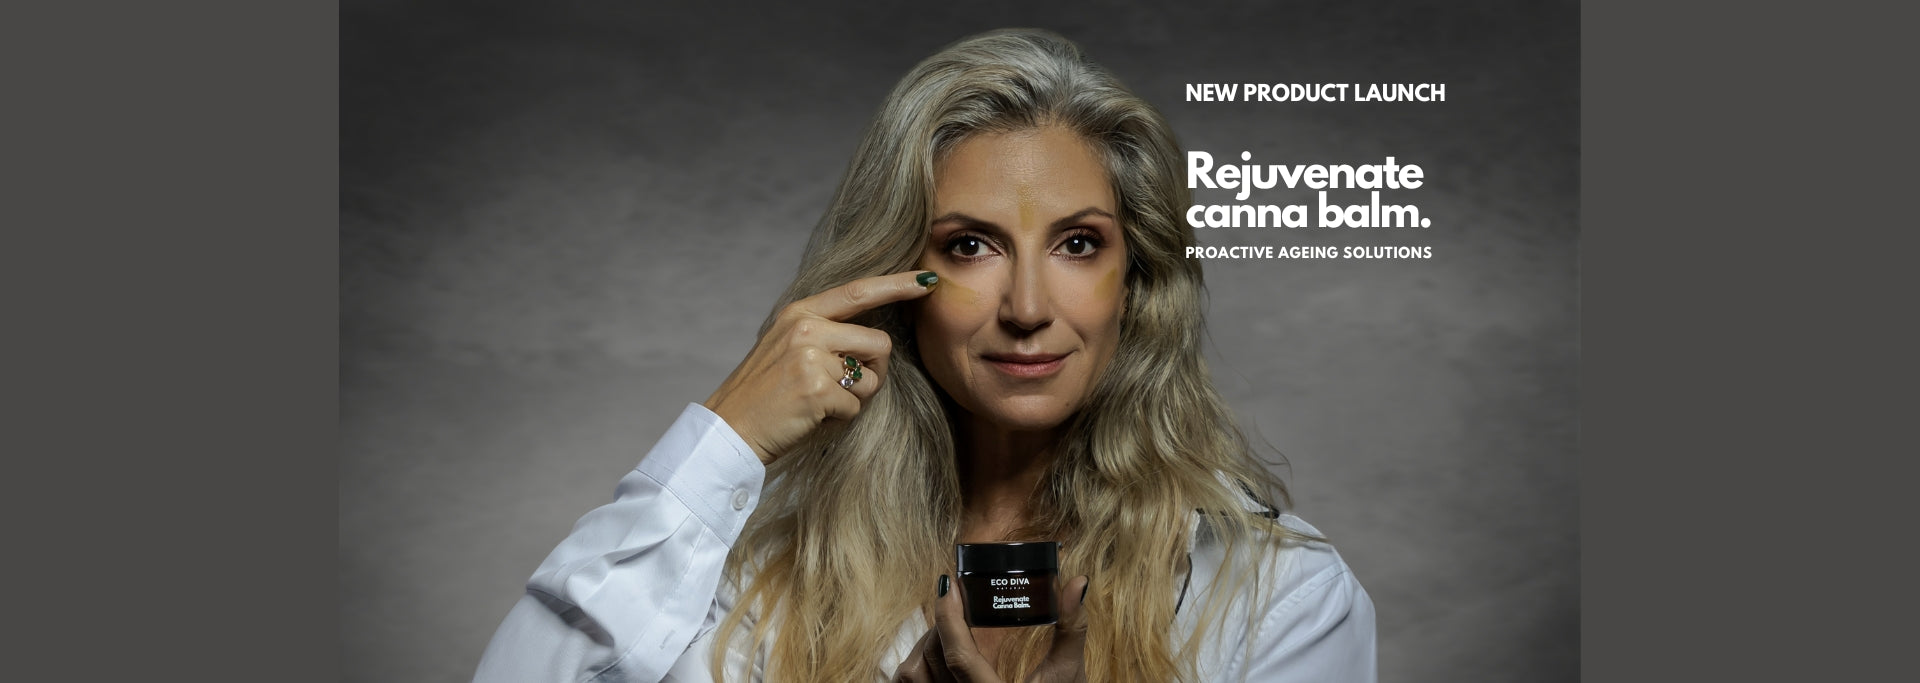 Rejuvenate Canna Balm New Product Launch